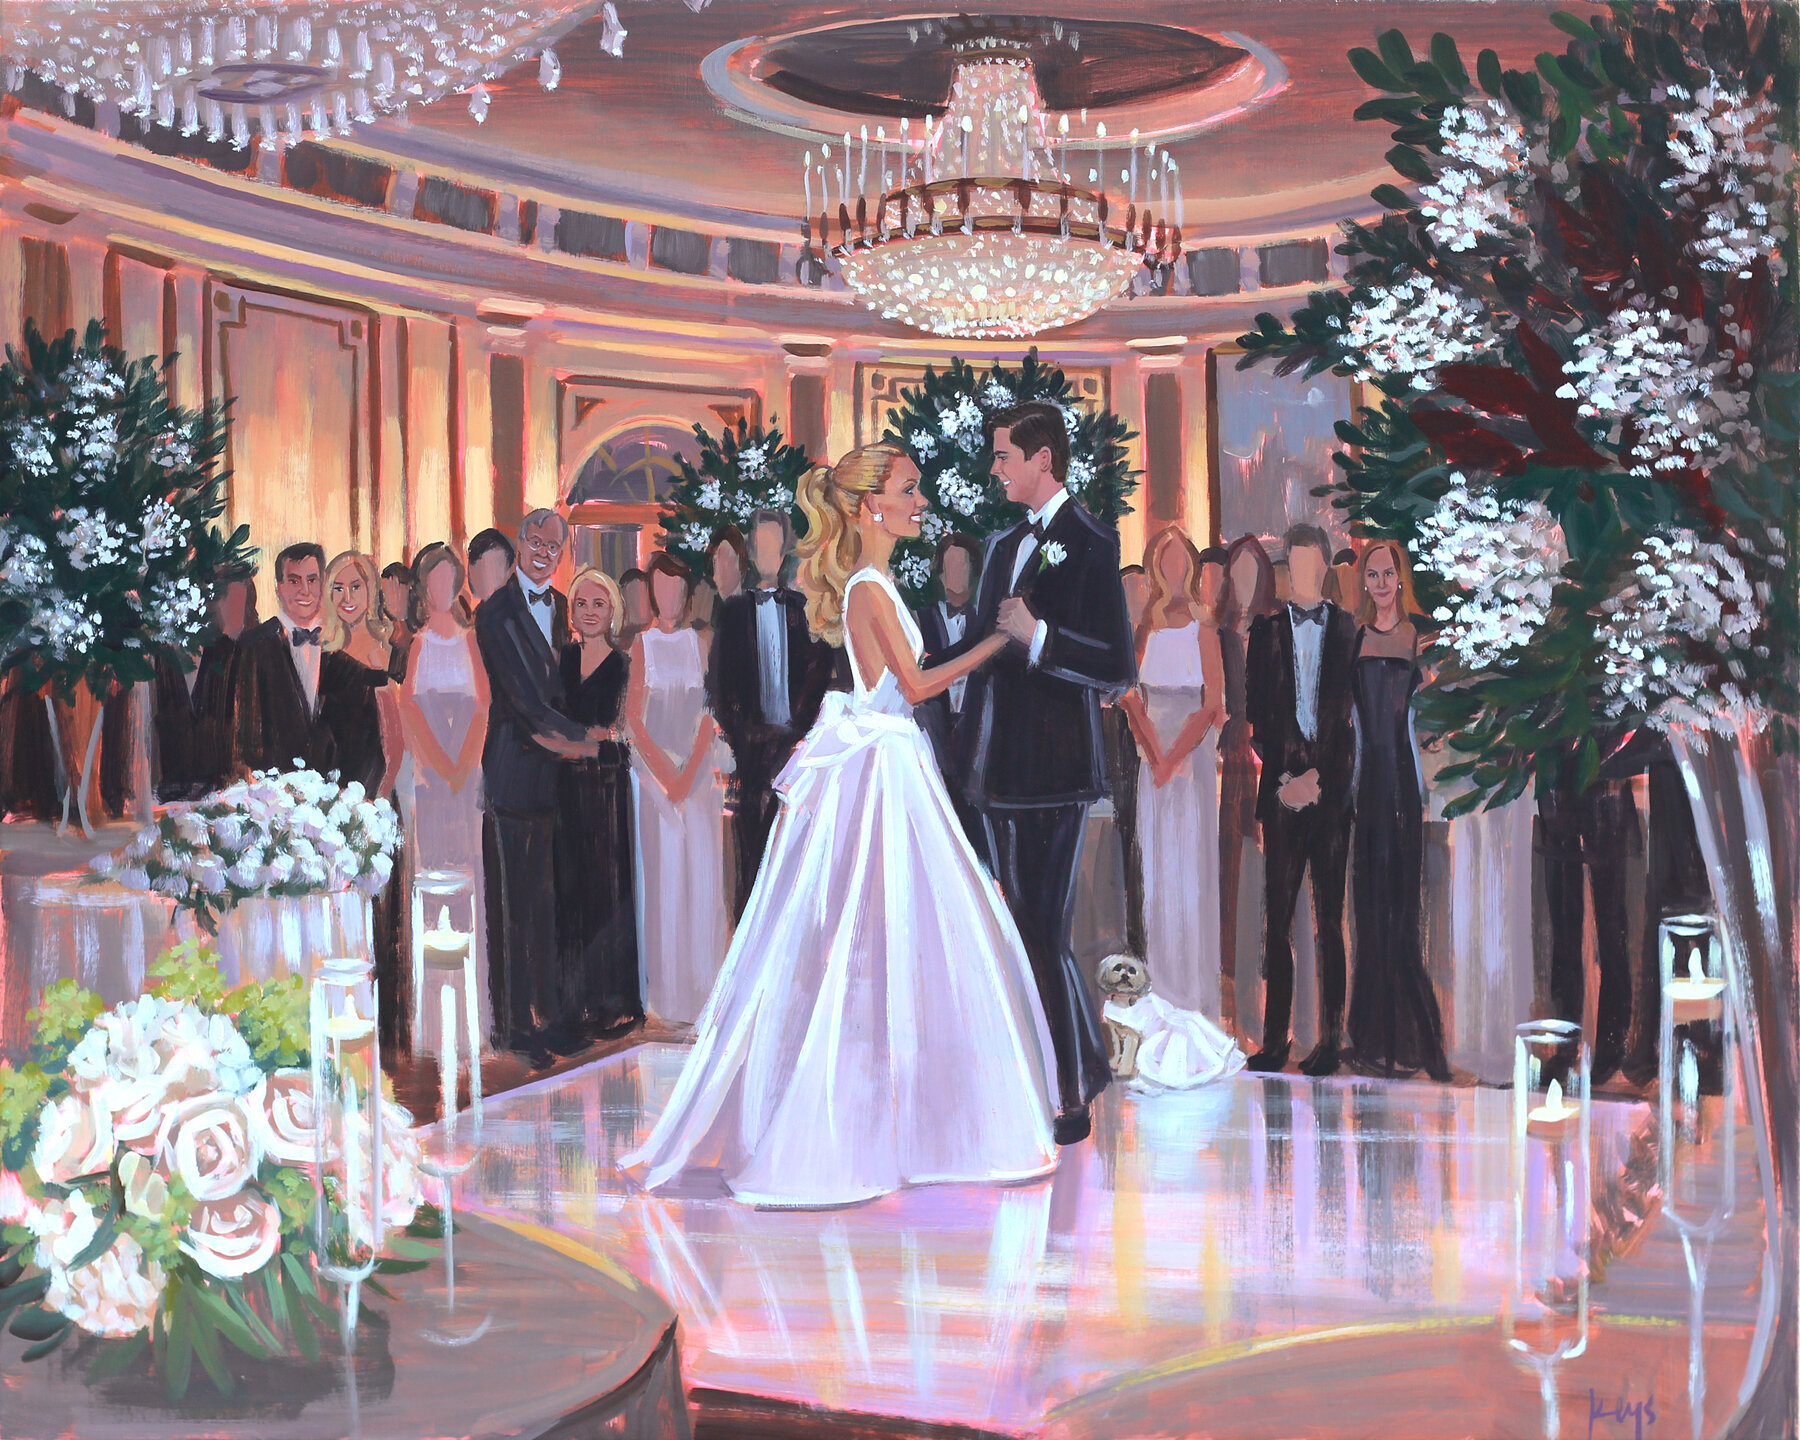 Live Wedding Painter, Ben Keys, captured Colleen and Paul’s first dance at Lotte New York Palace Hotel.